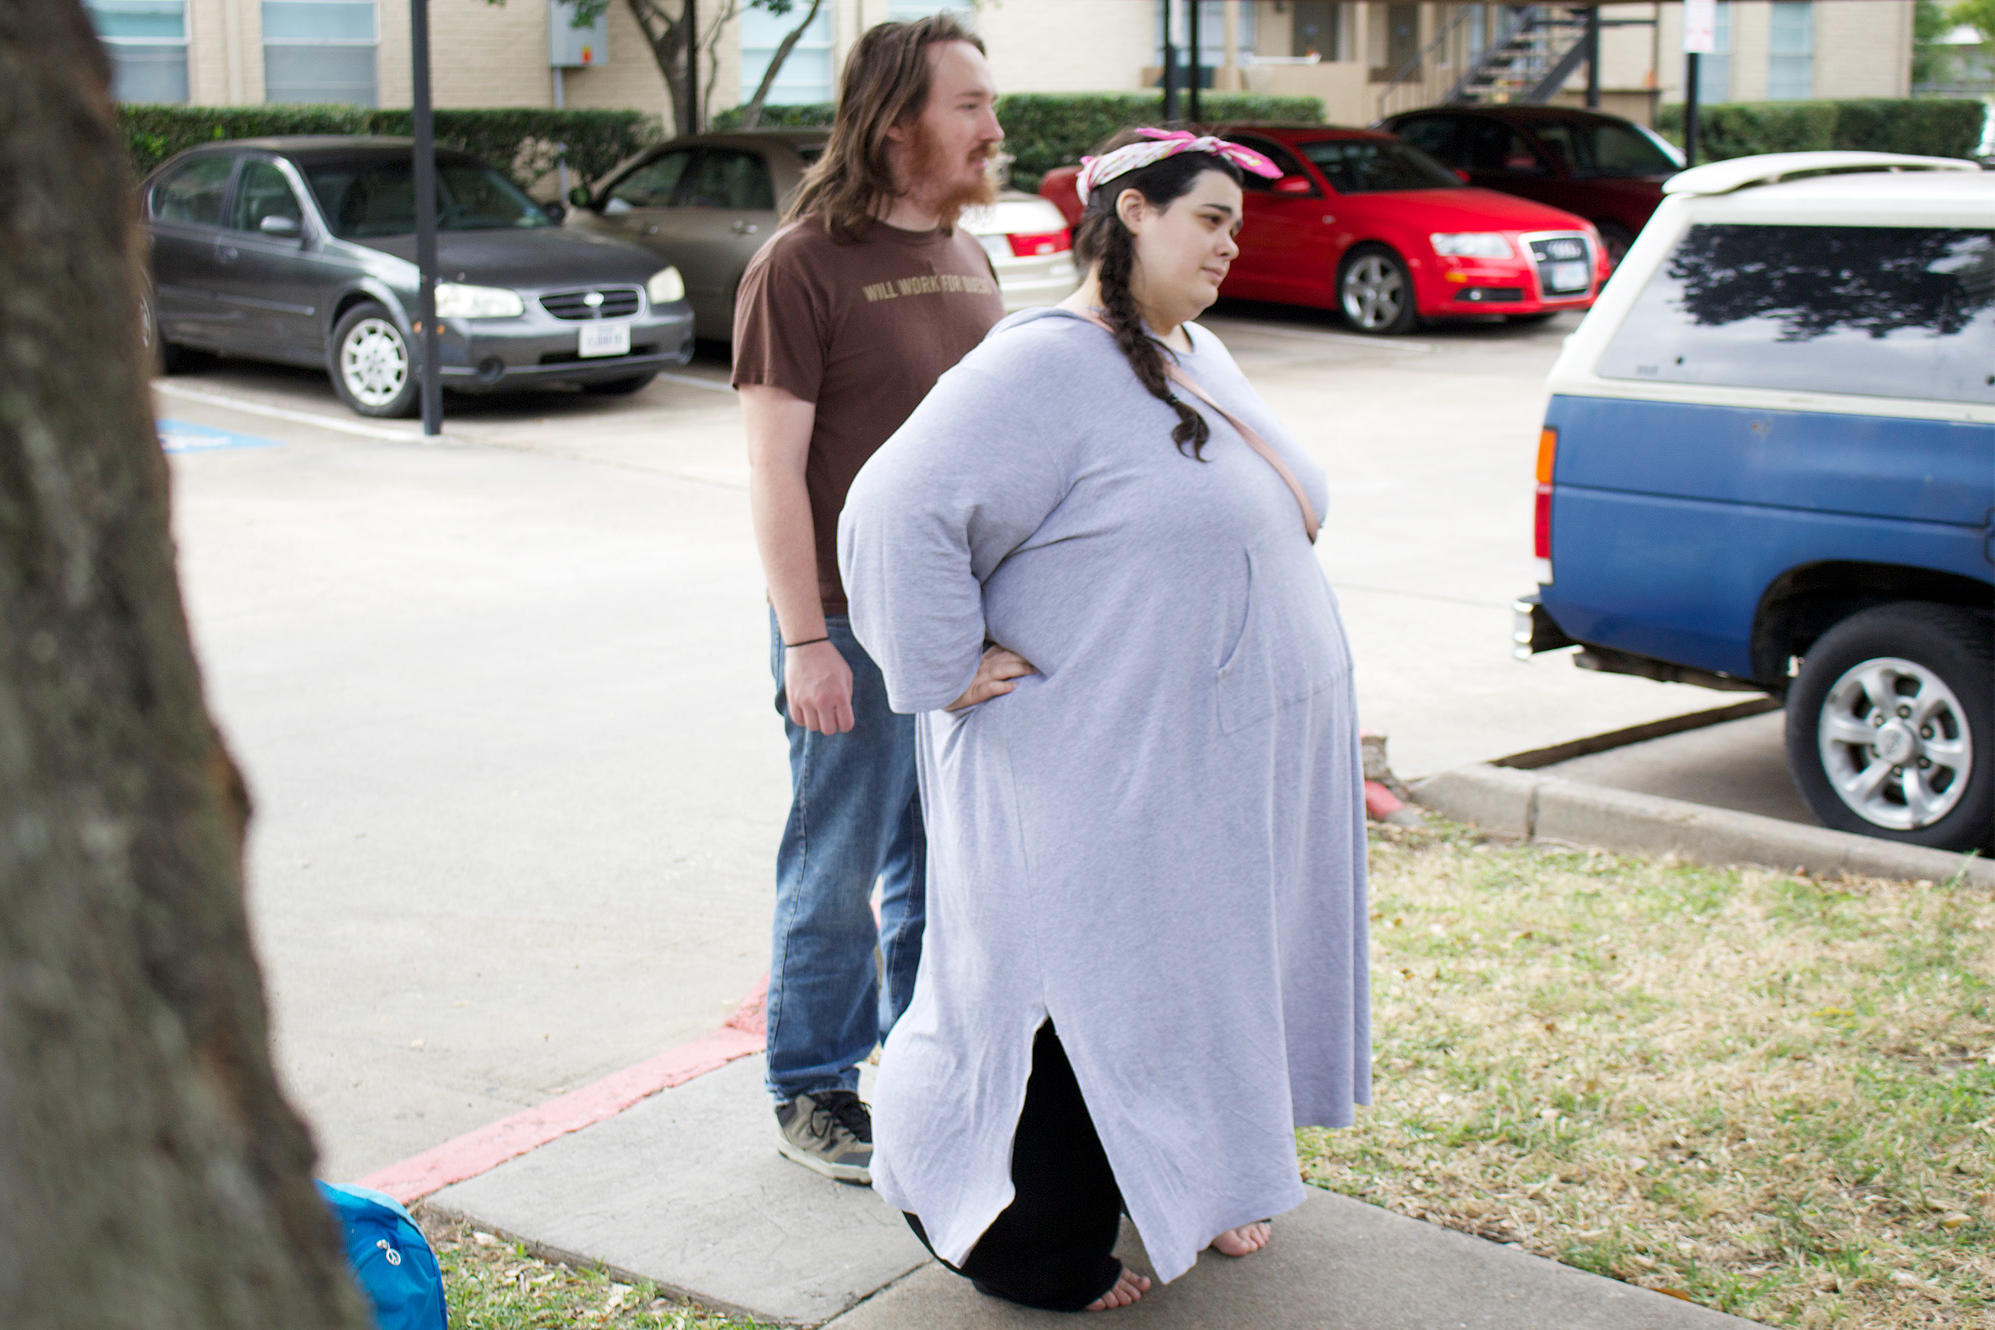 11 Year Old Looks After Overweight Mother My 600-lb Life